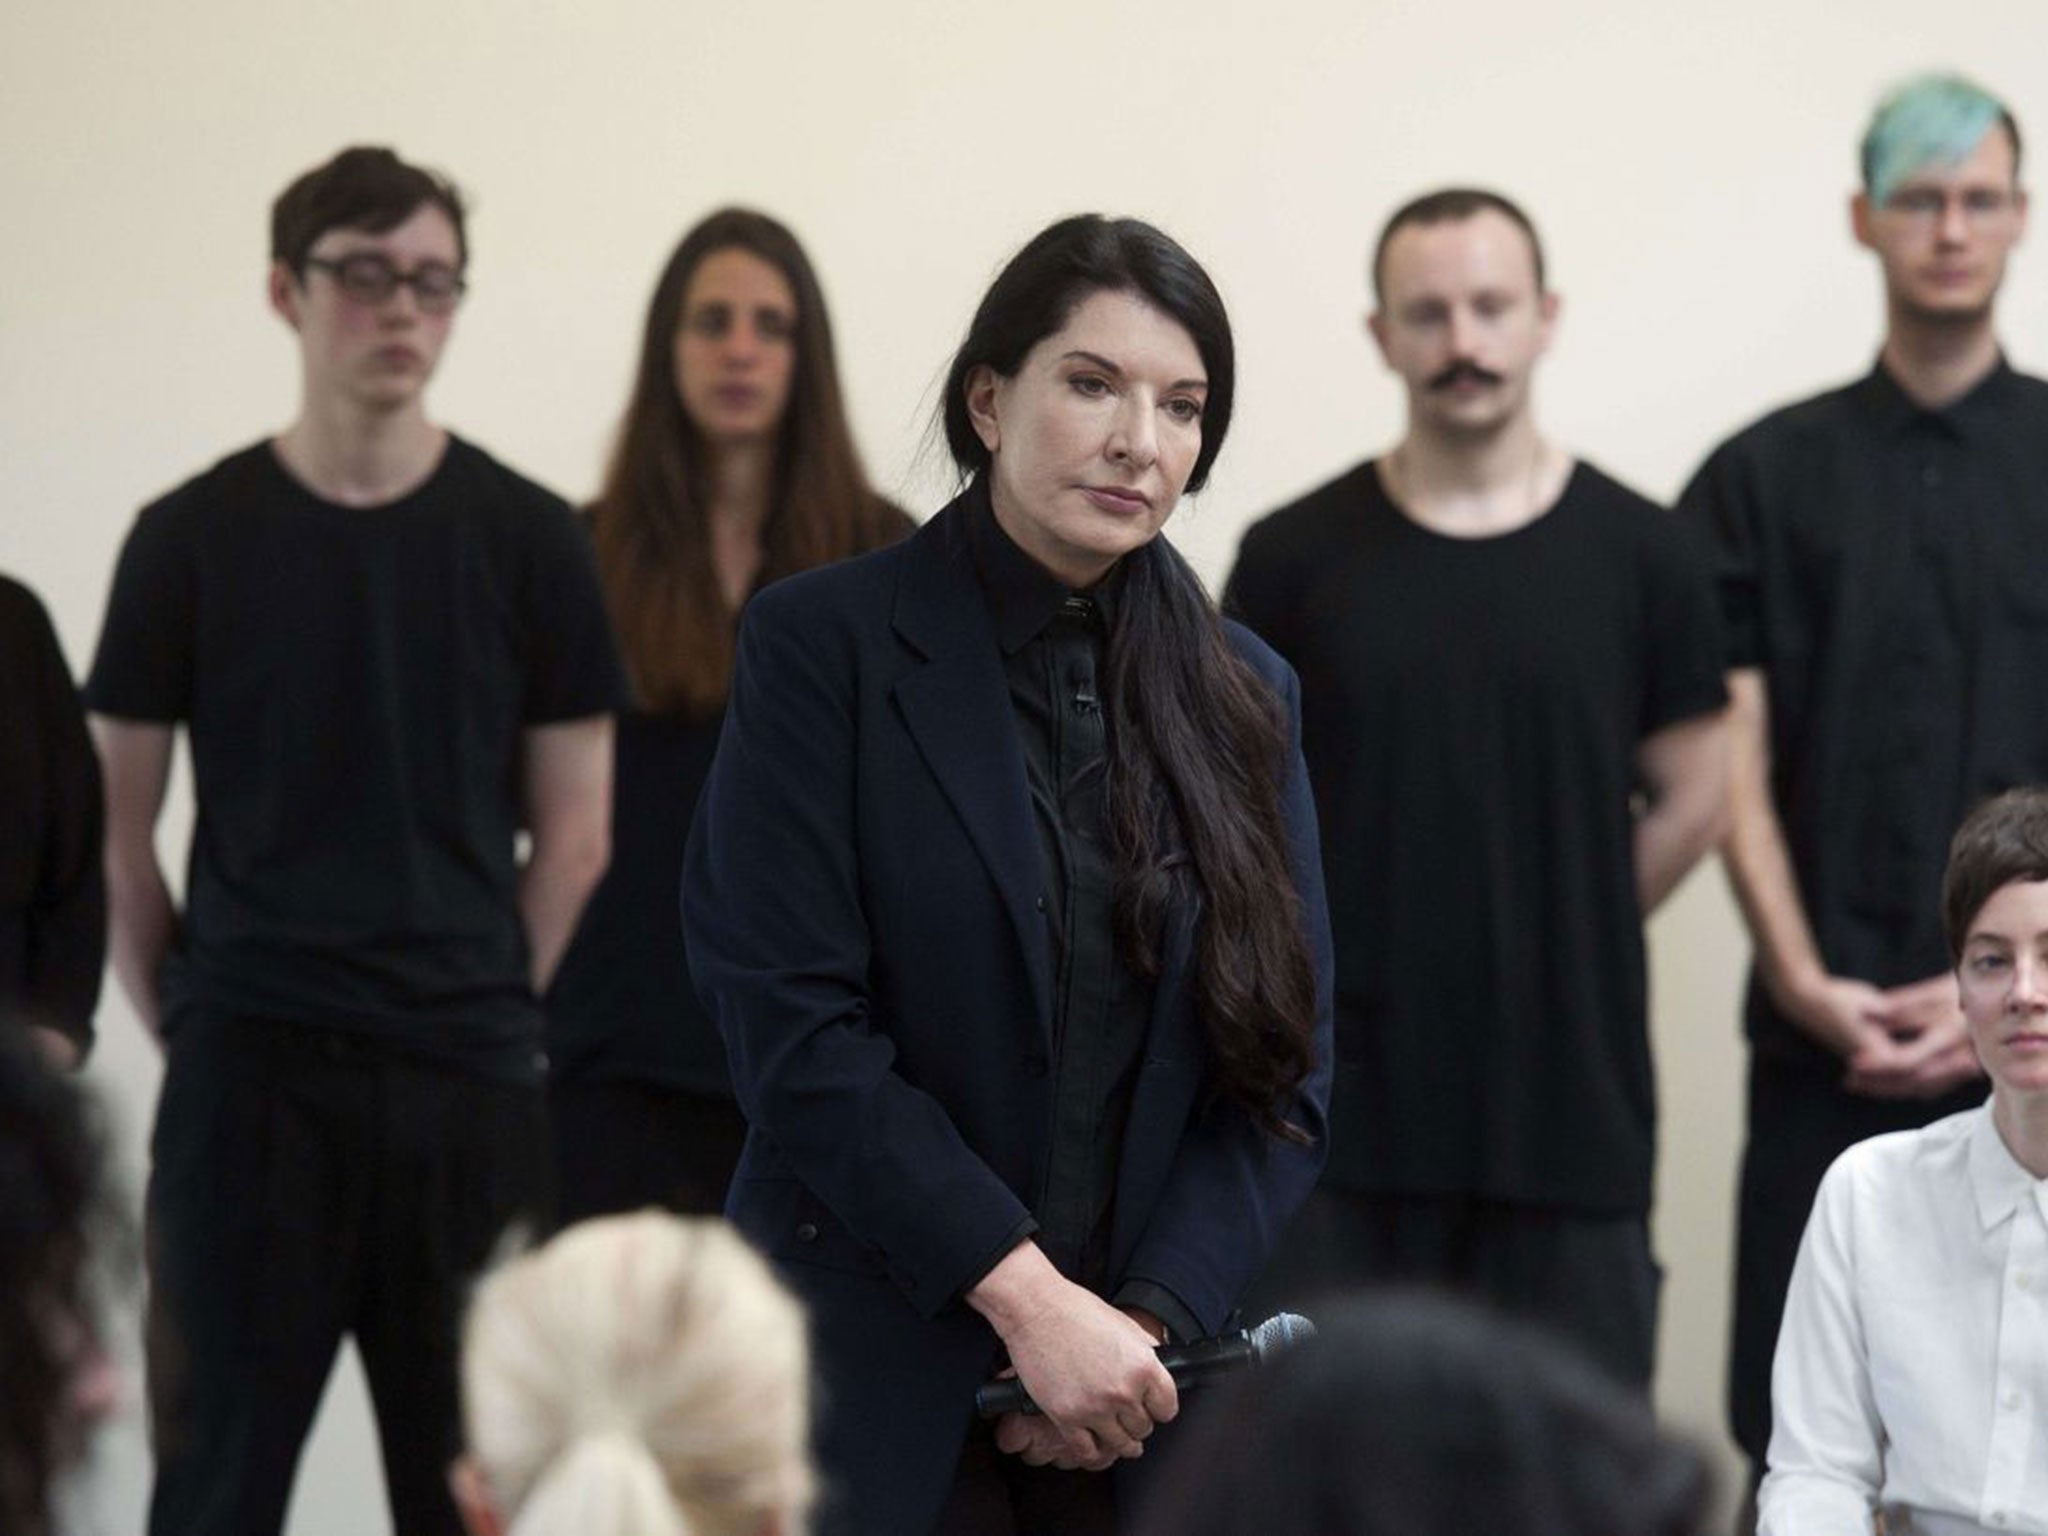 Serbian-born performance artist Marina Abramovic,centre, announces her latest durational performance at the Serpentine Gallery in London